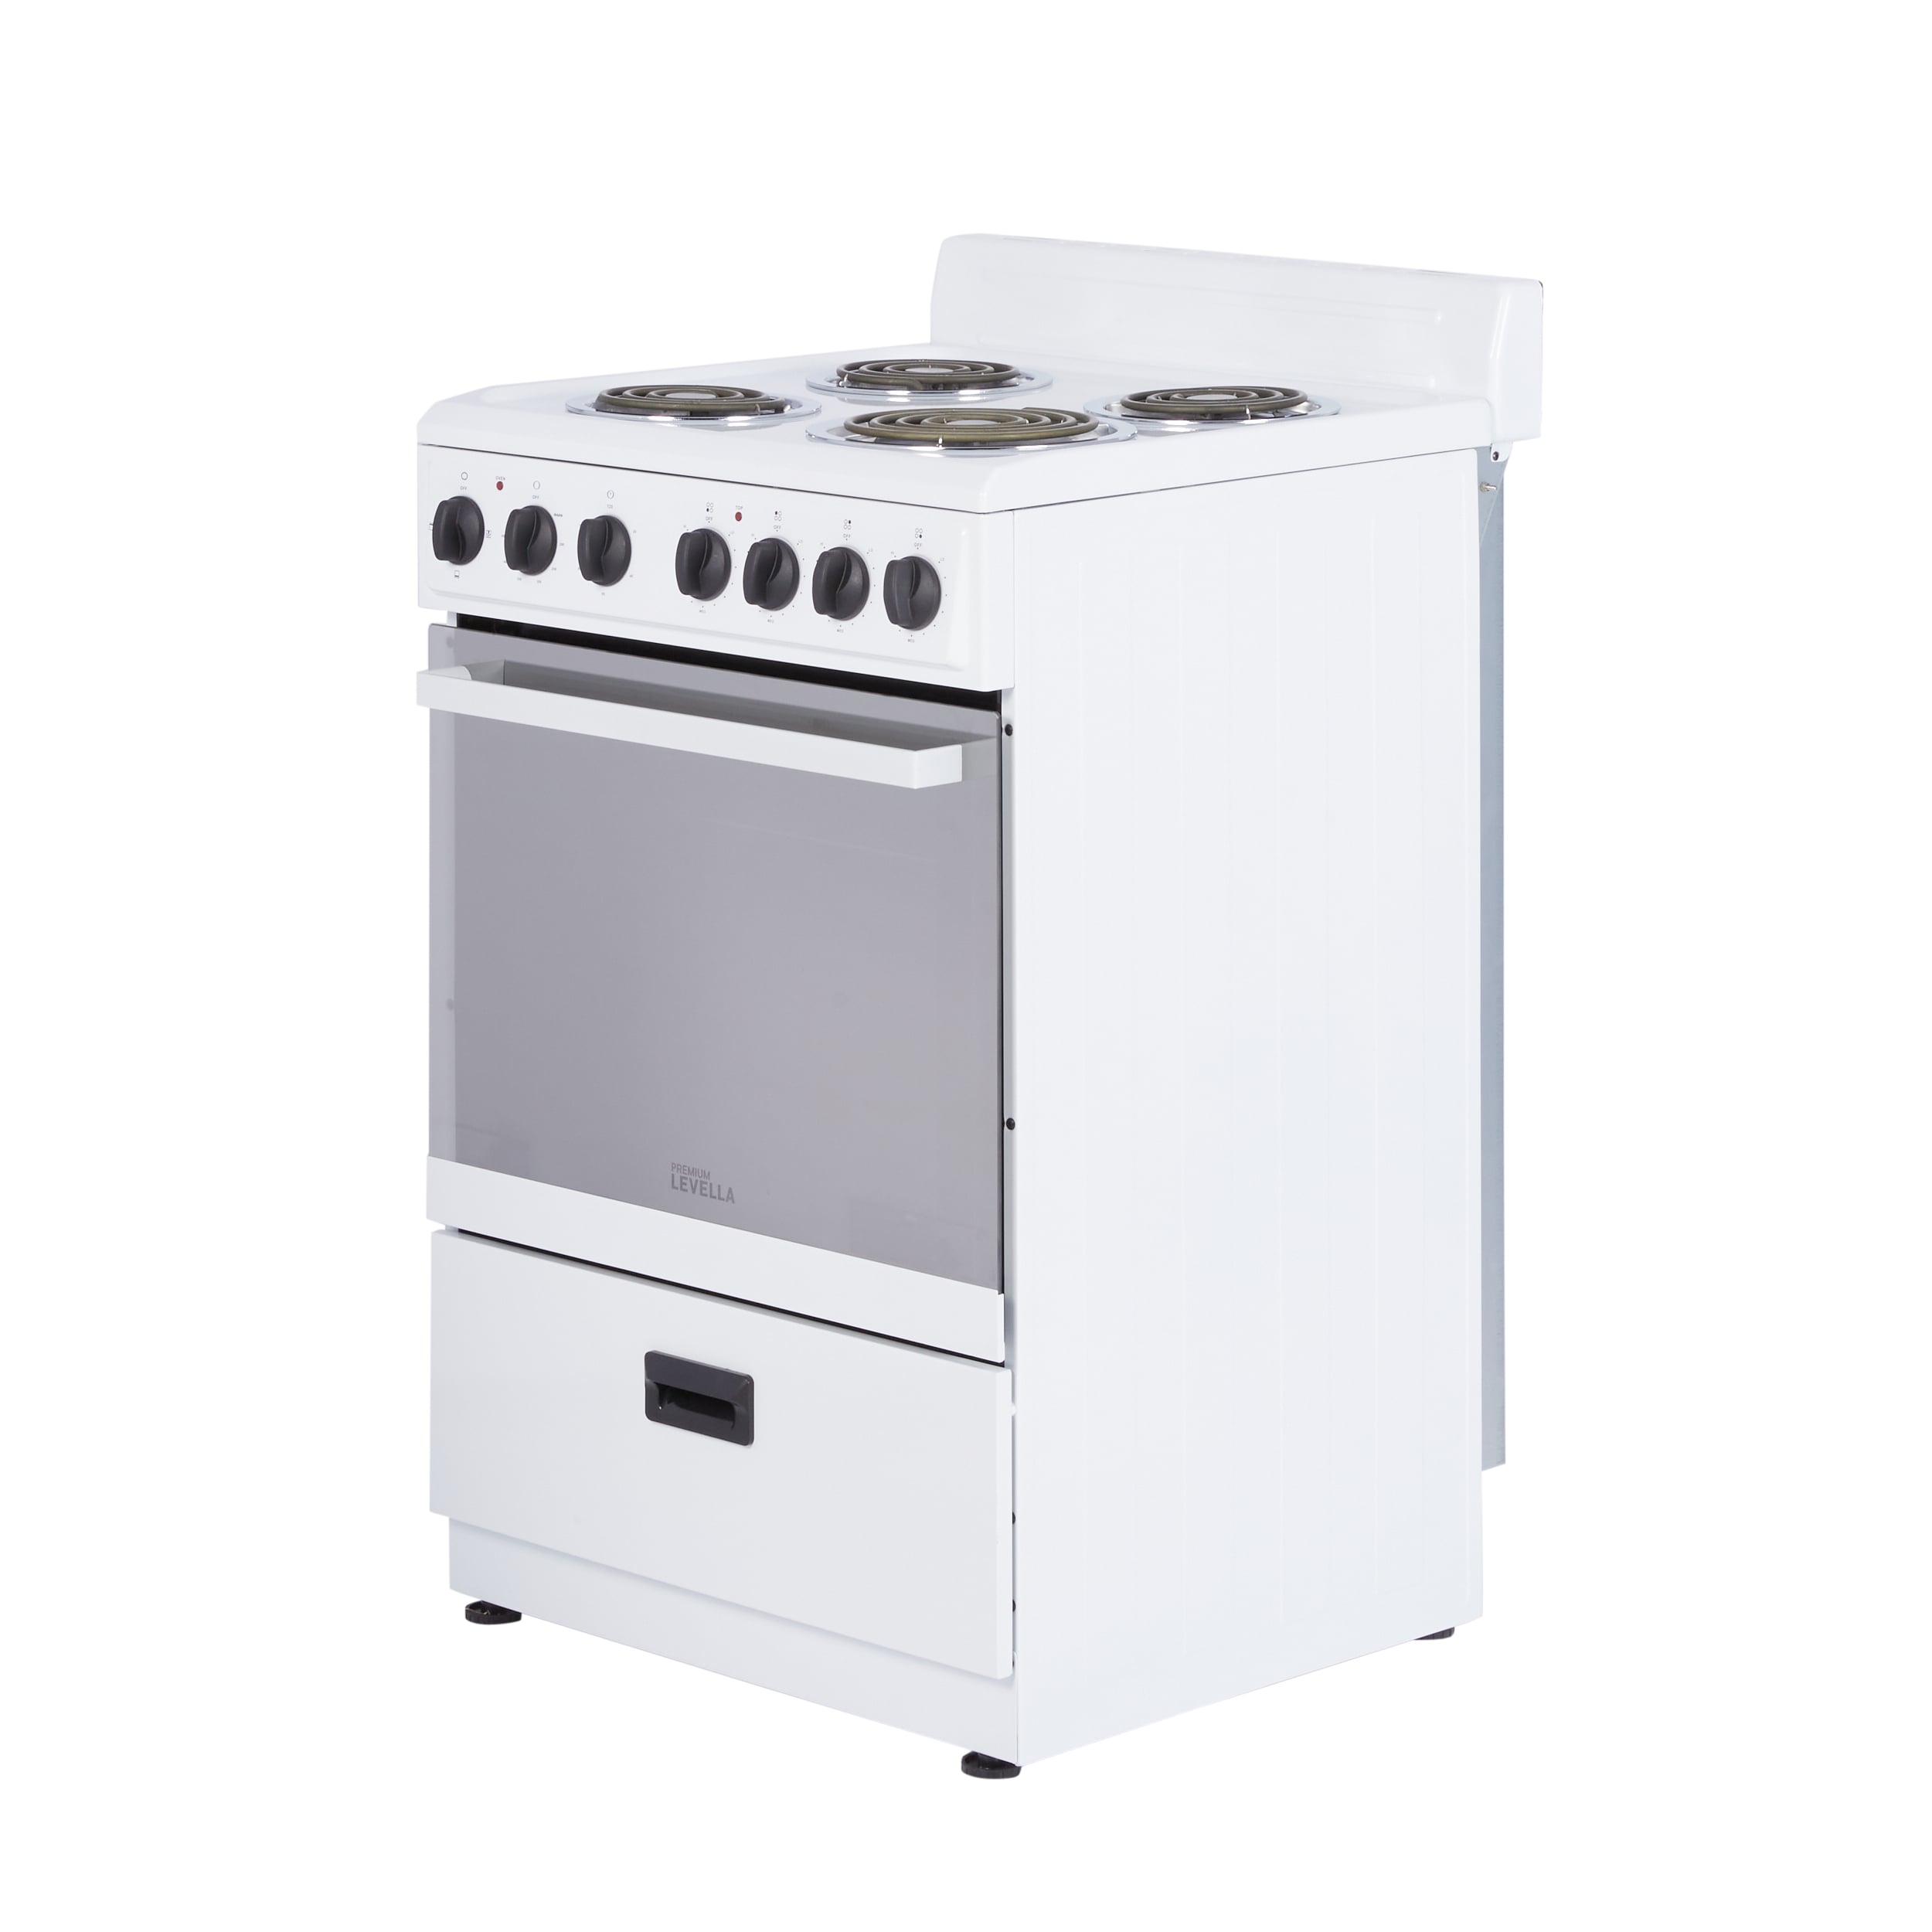 Premium Levella 24 Electric Range with 4 Coil Burners and 2.6 Cu. ft. Oven Capacity in Stainless